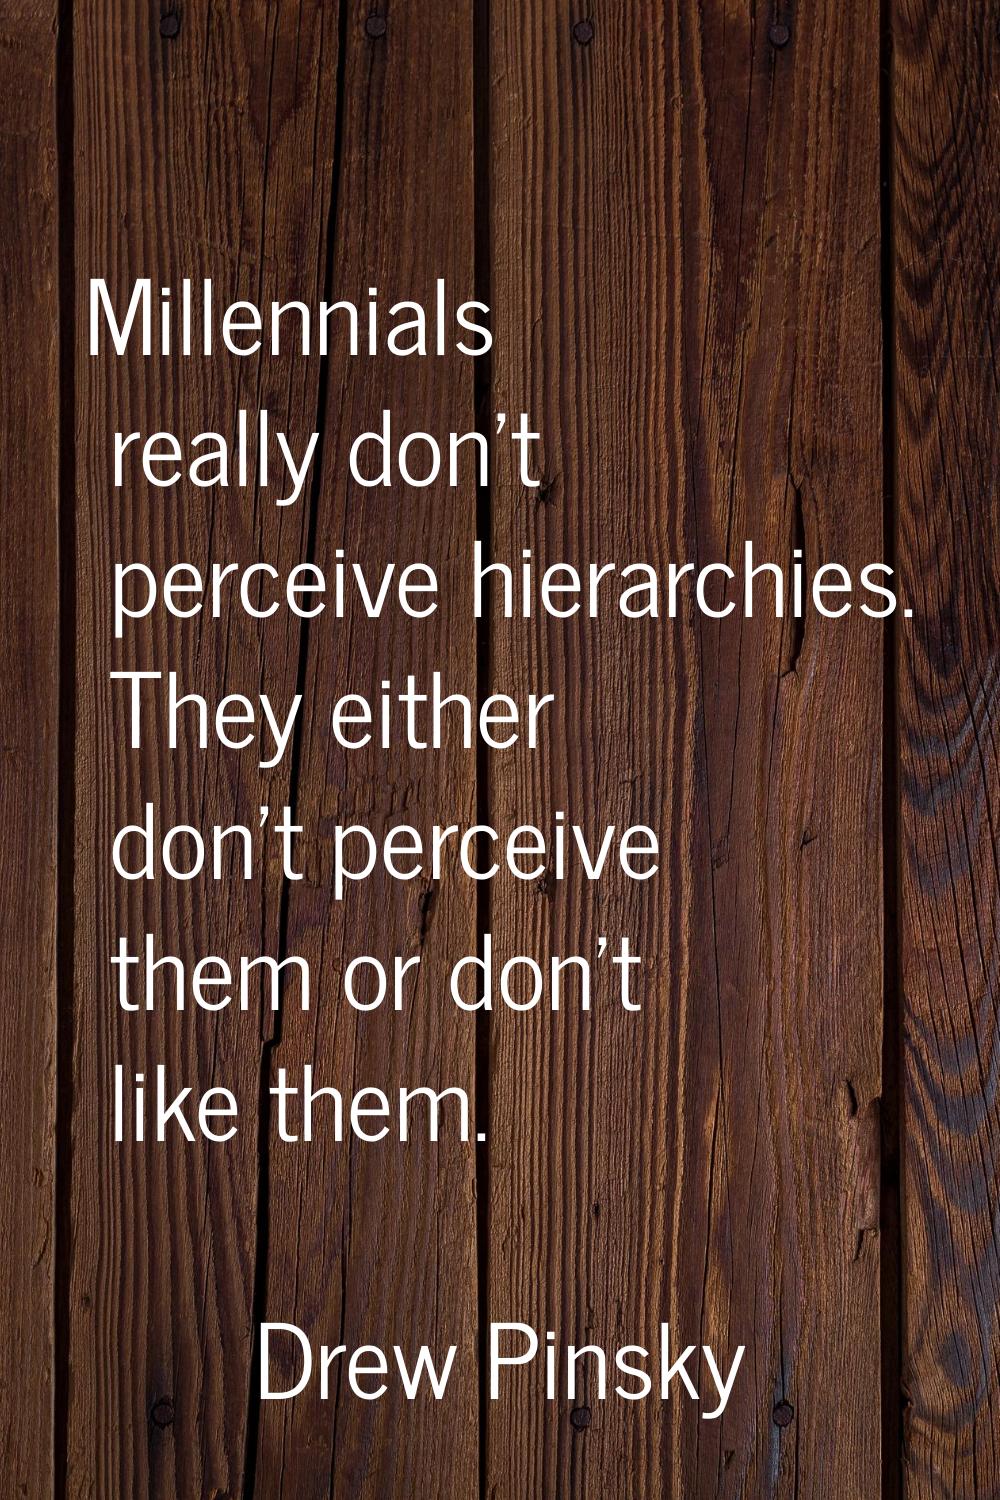 Millennials really don't perceive hierarchies. They either don't perceive them or don't like them.